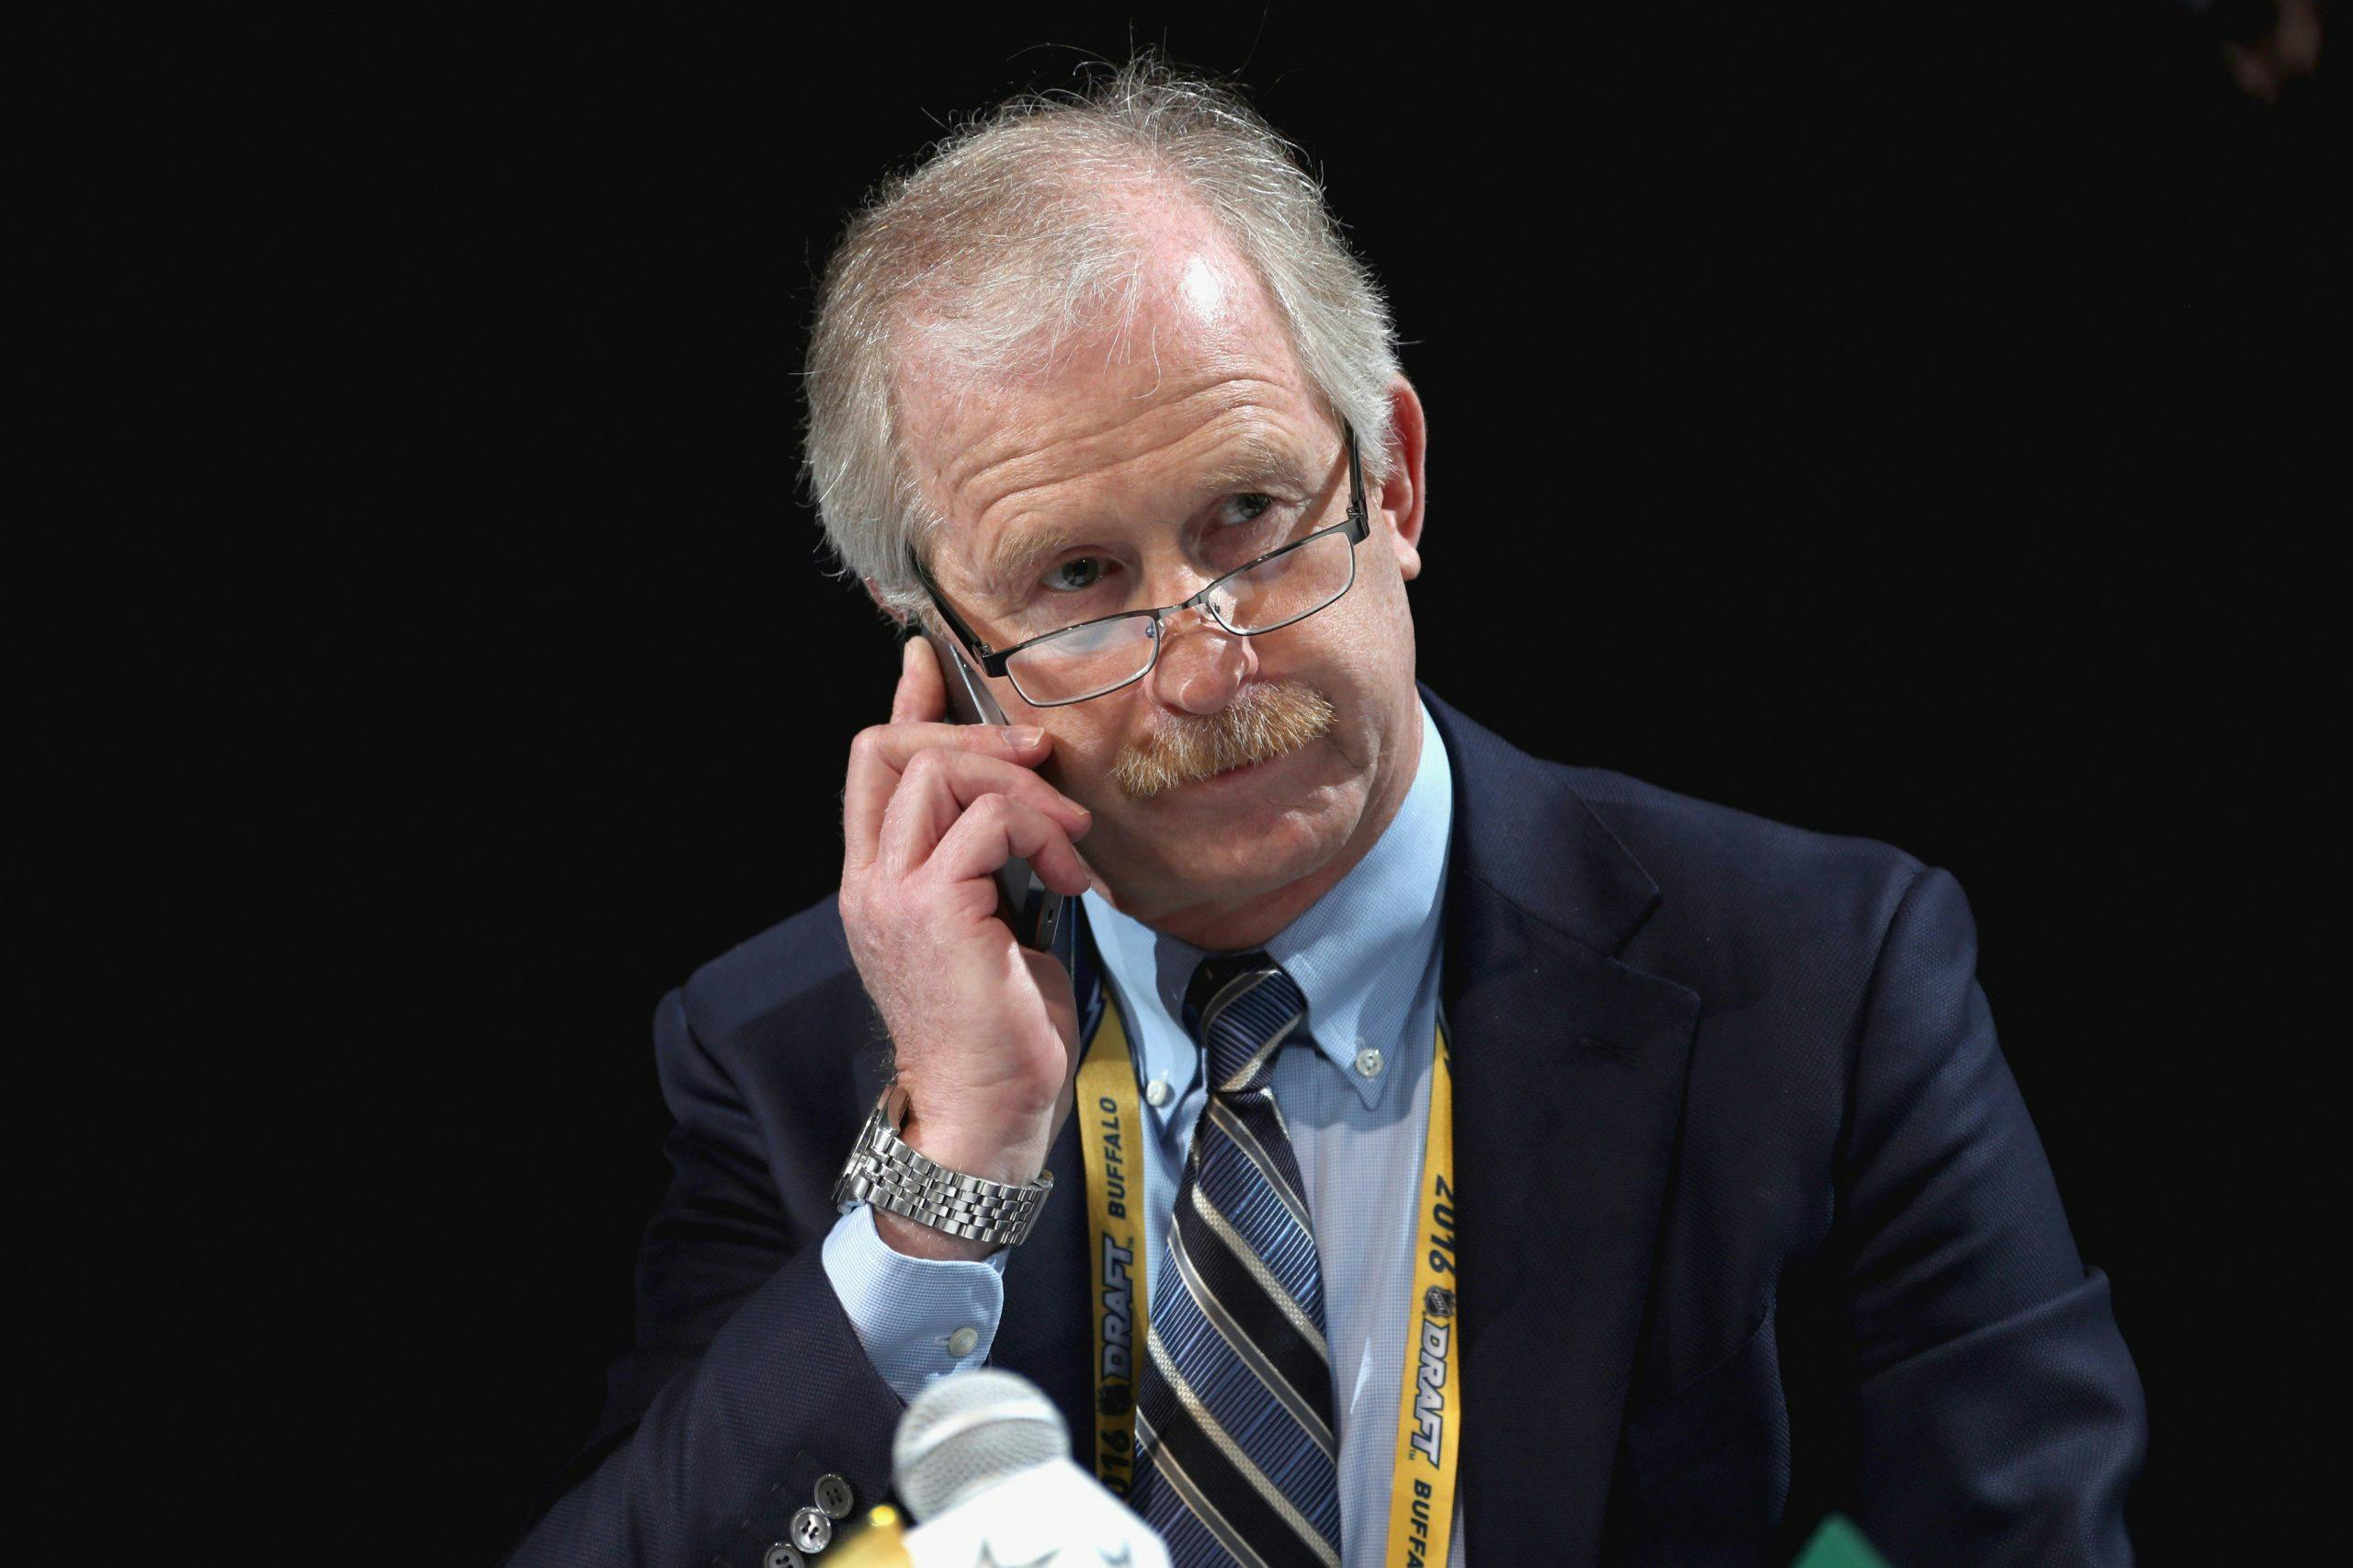 Stars’ Jim Nill wins Gregory Award as NHL GM of the Year Daily Faceoff